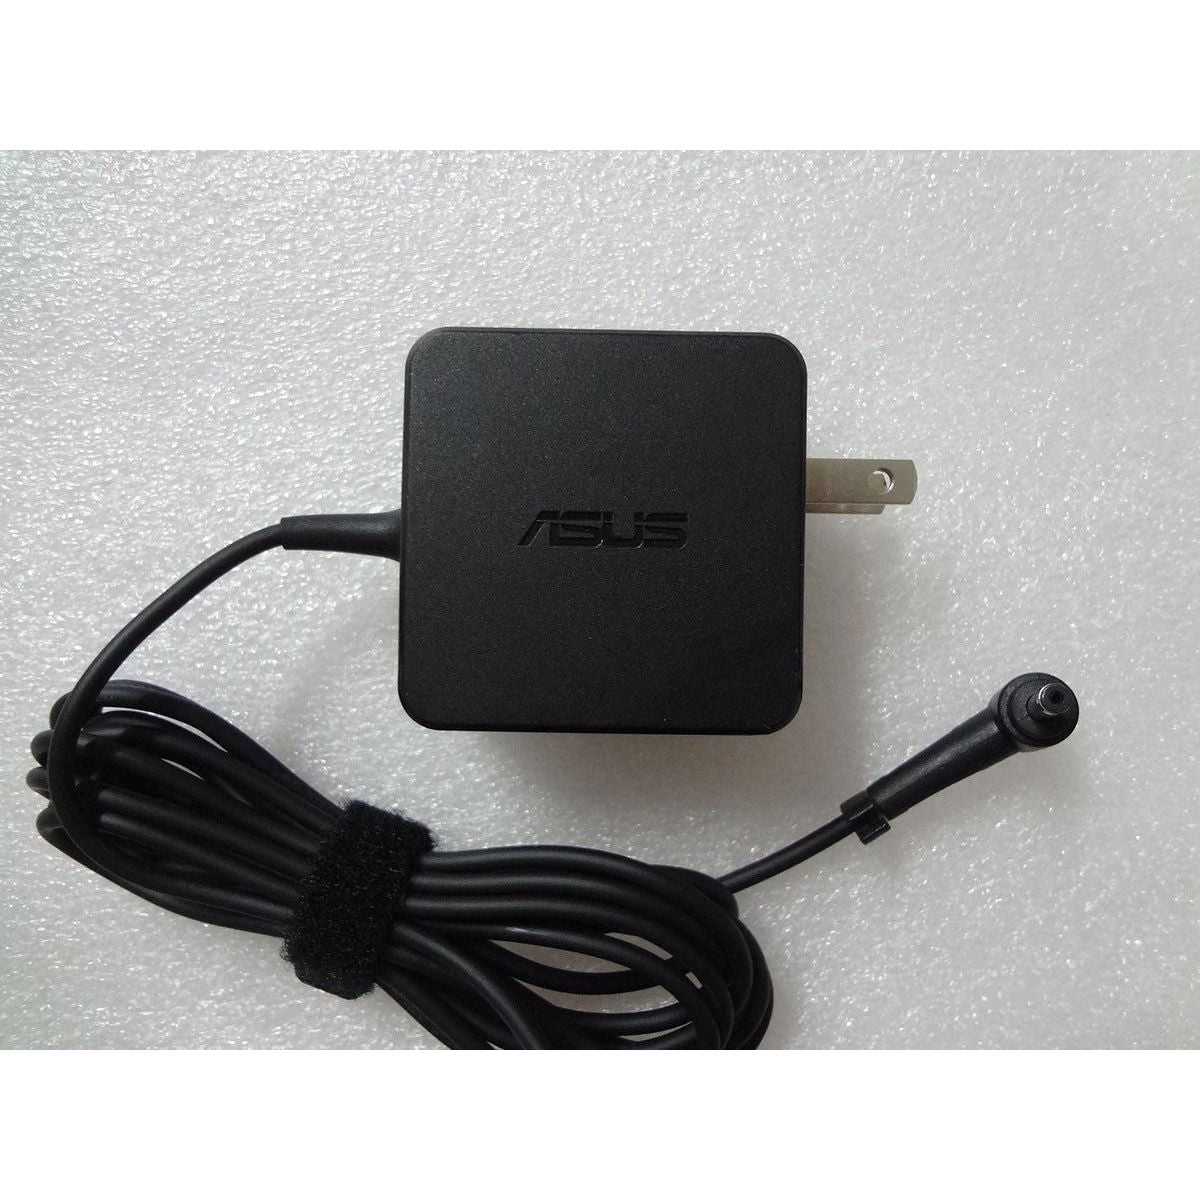 New Genuine Asus 0A001-00330100 0A001-00340200 AC Adapter Charger 33W